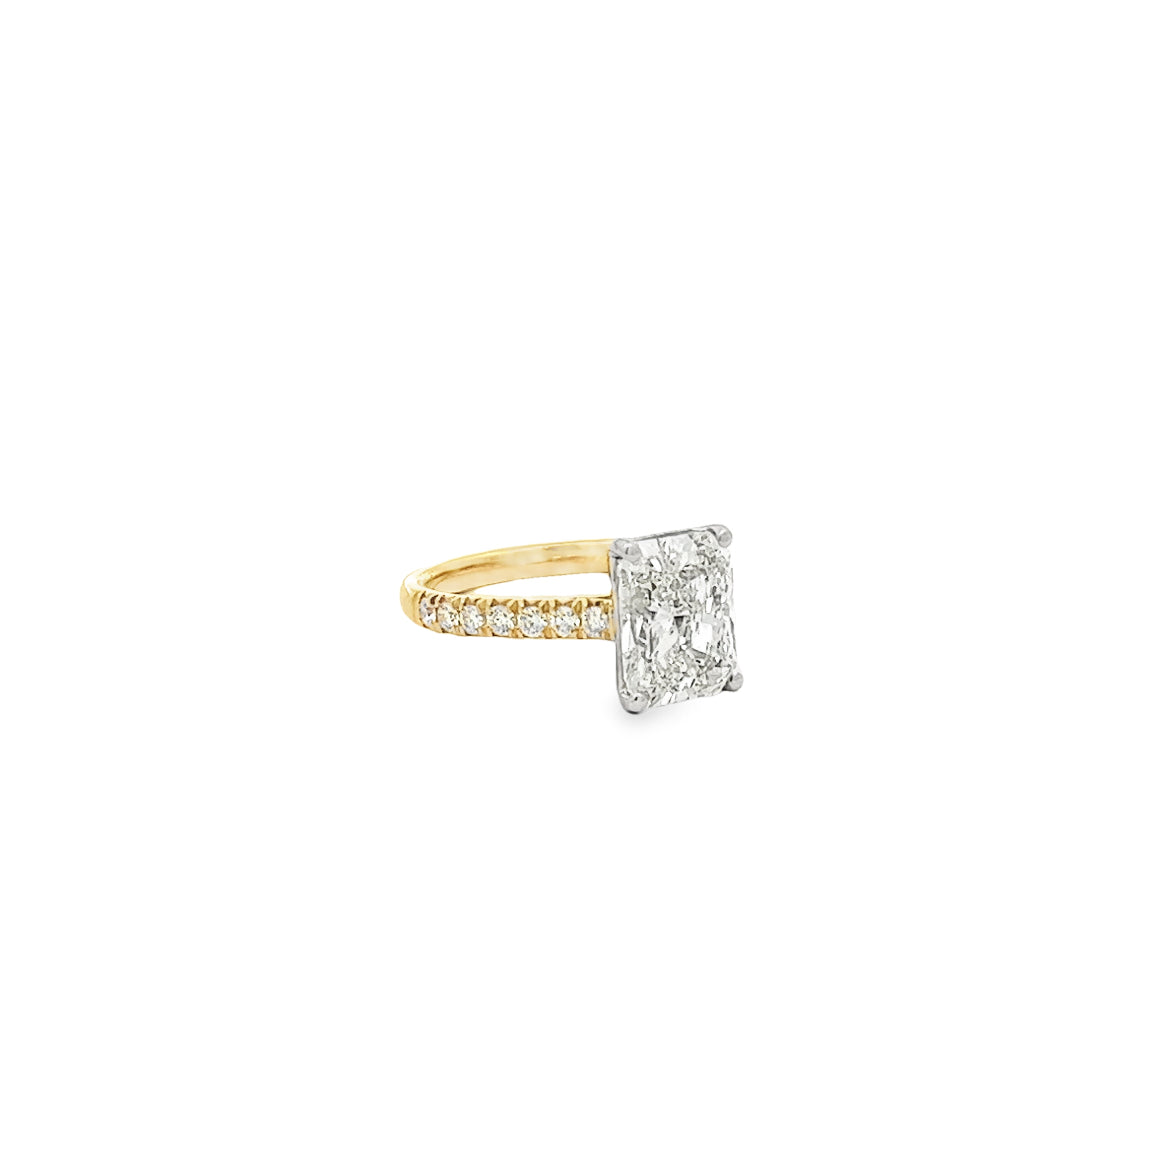 The Jewel 18K Yellow Gold Radiant Cut Engagement Ring